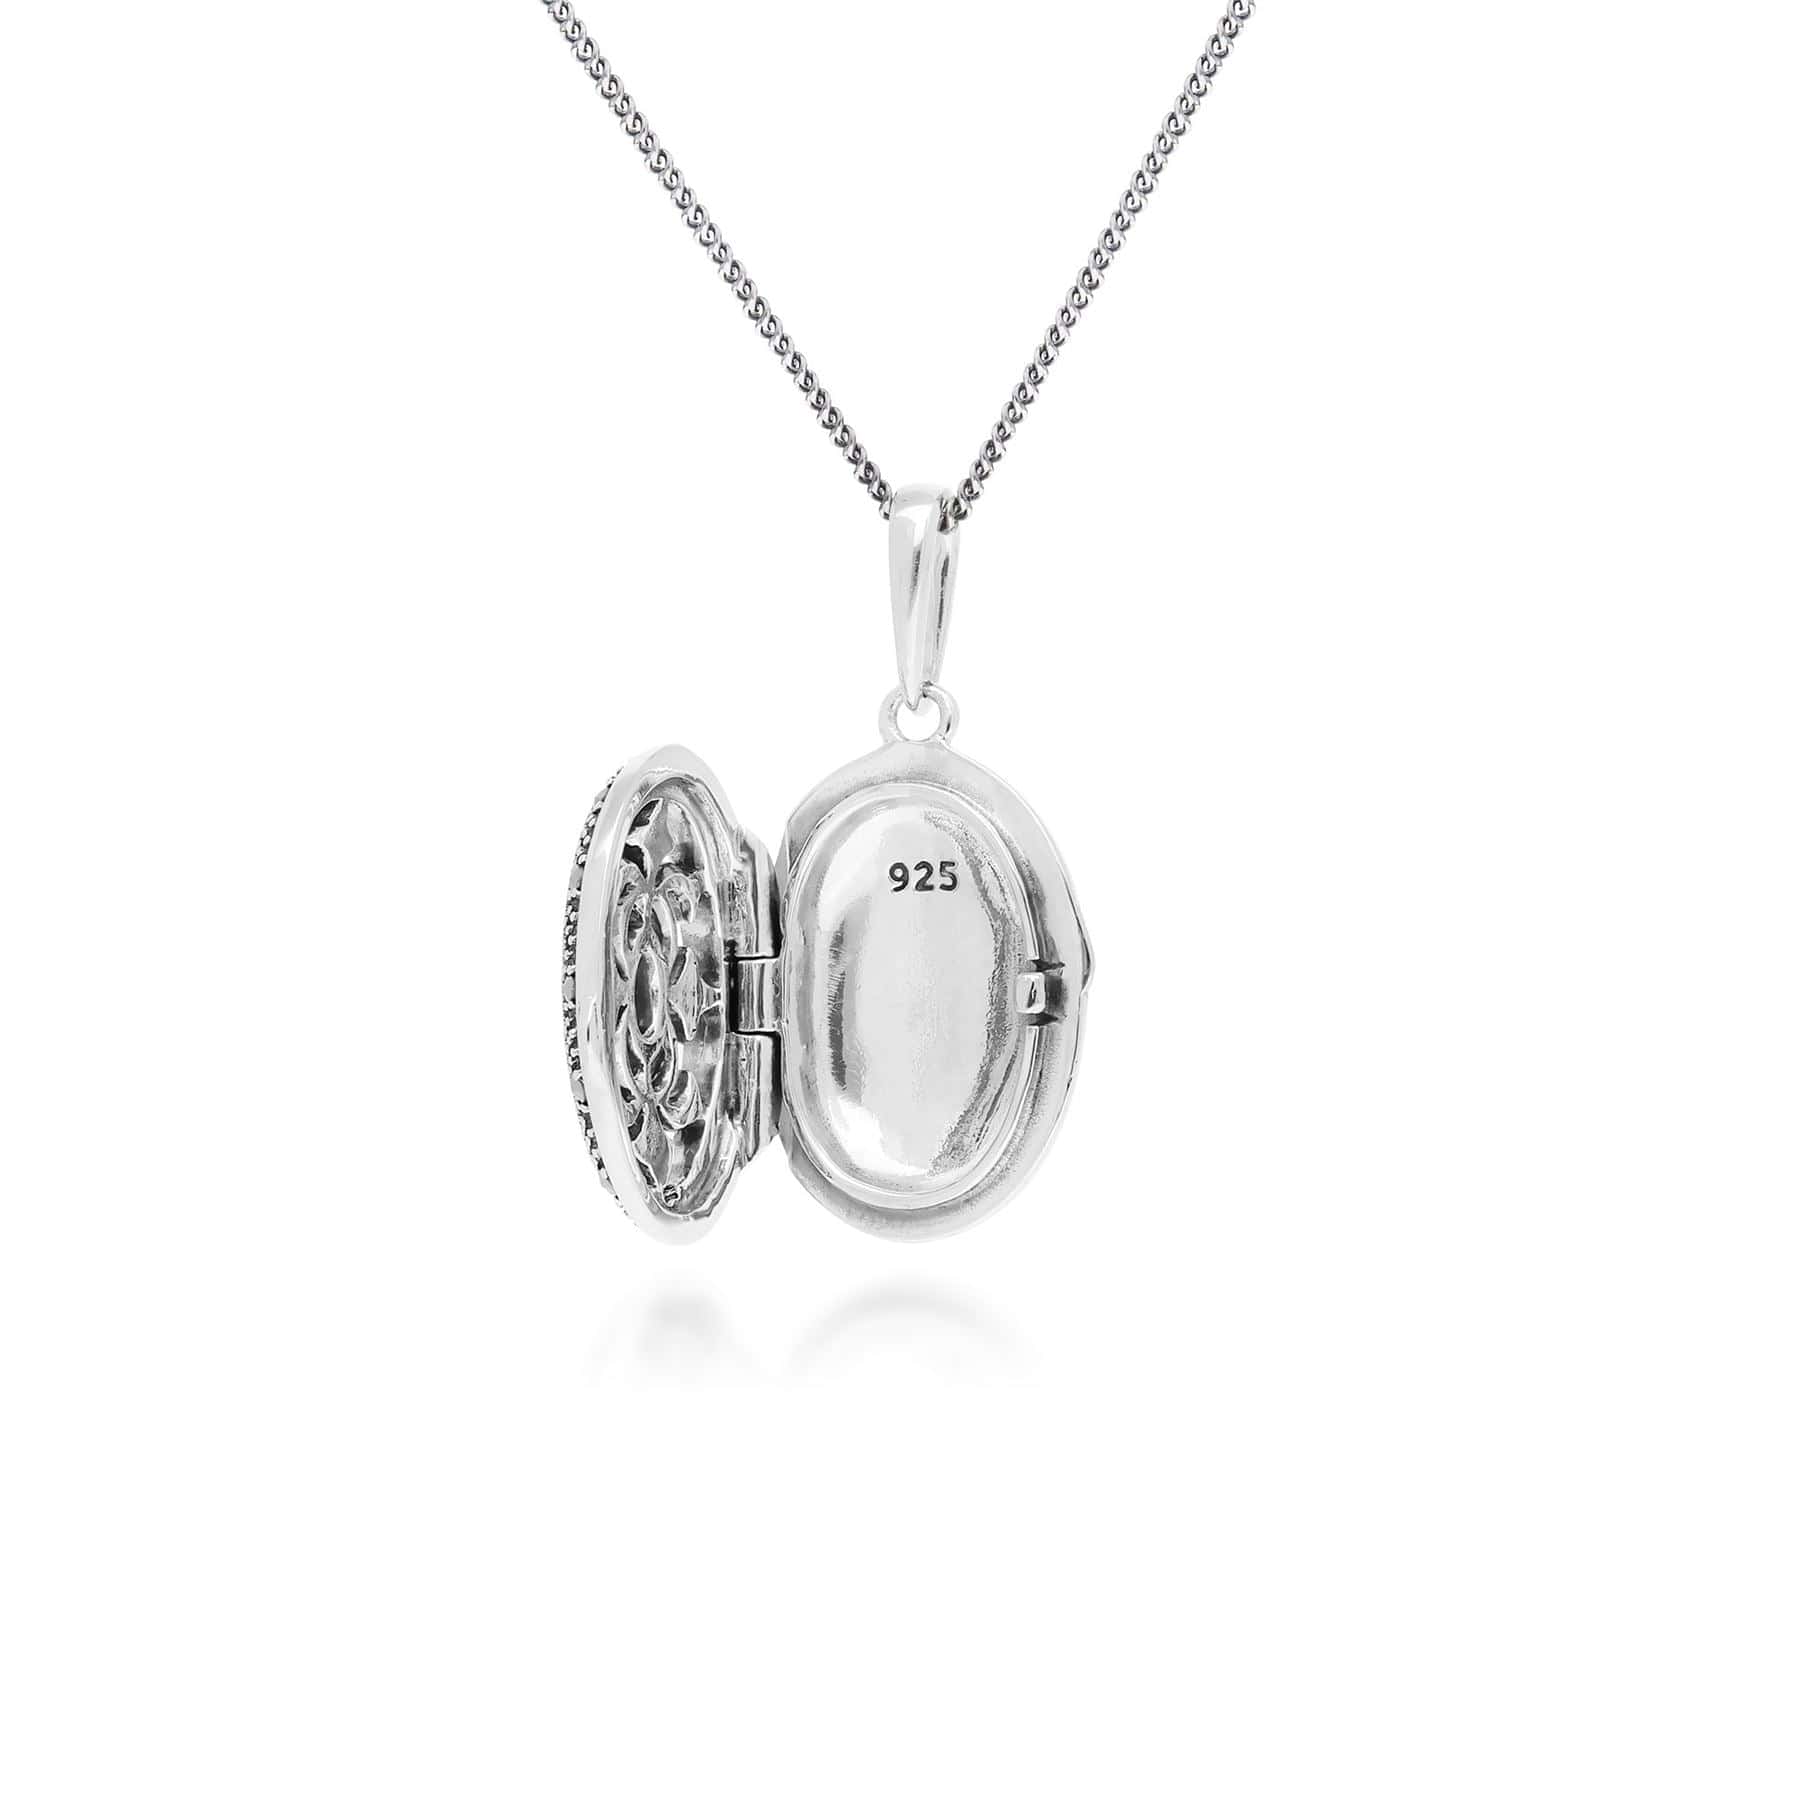 214N716208925 Art Nouveau Style Oval Topaz & Marcasite Locket Necklace in 925 Sterling Silver 3